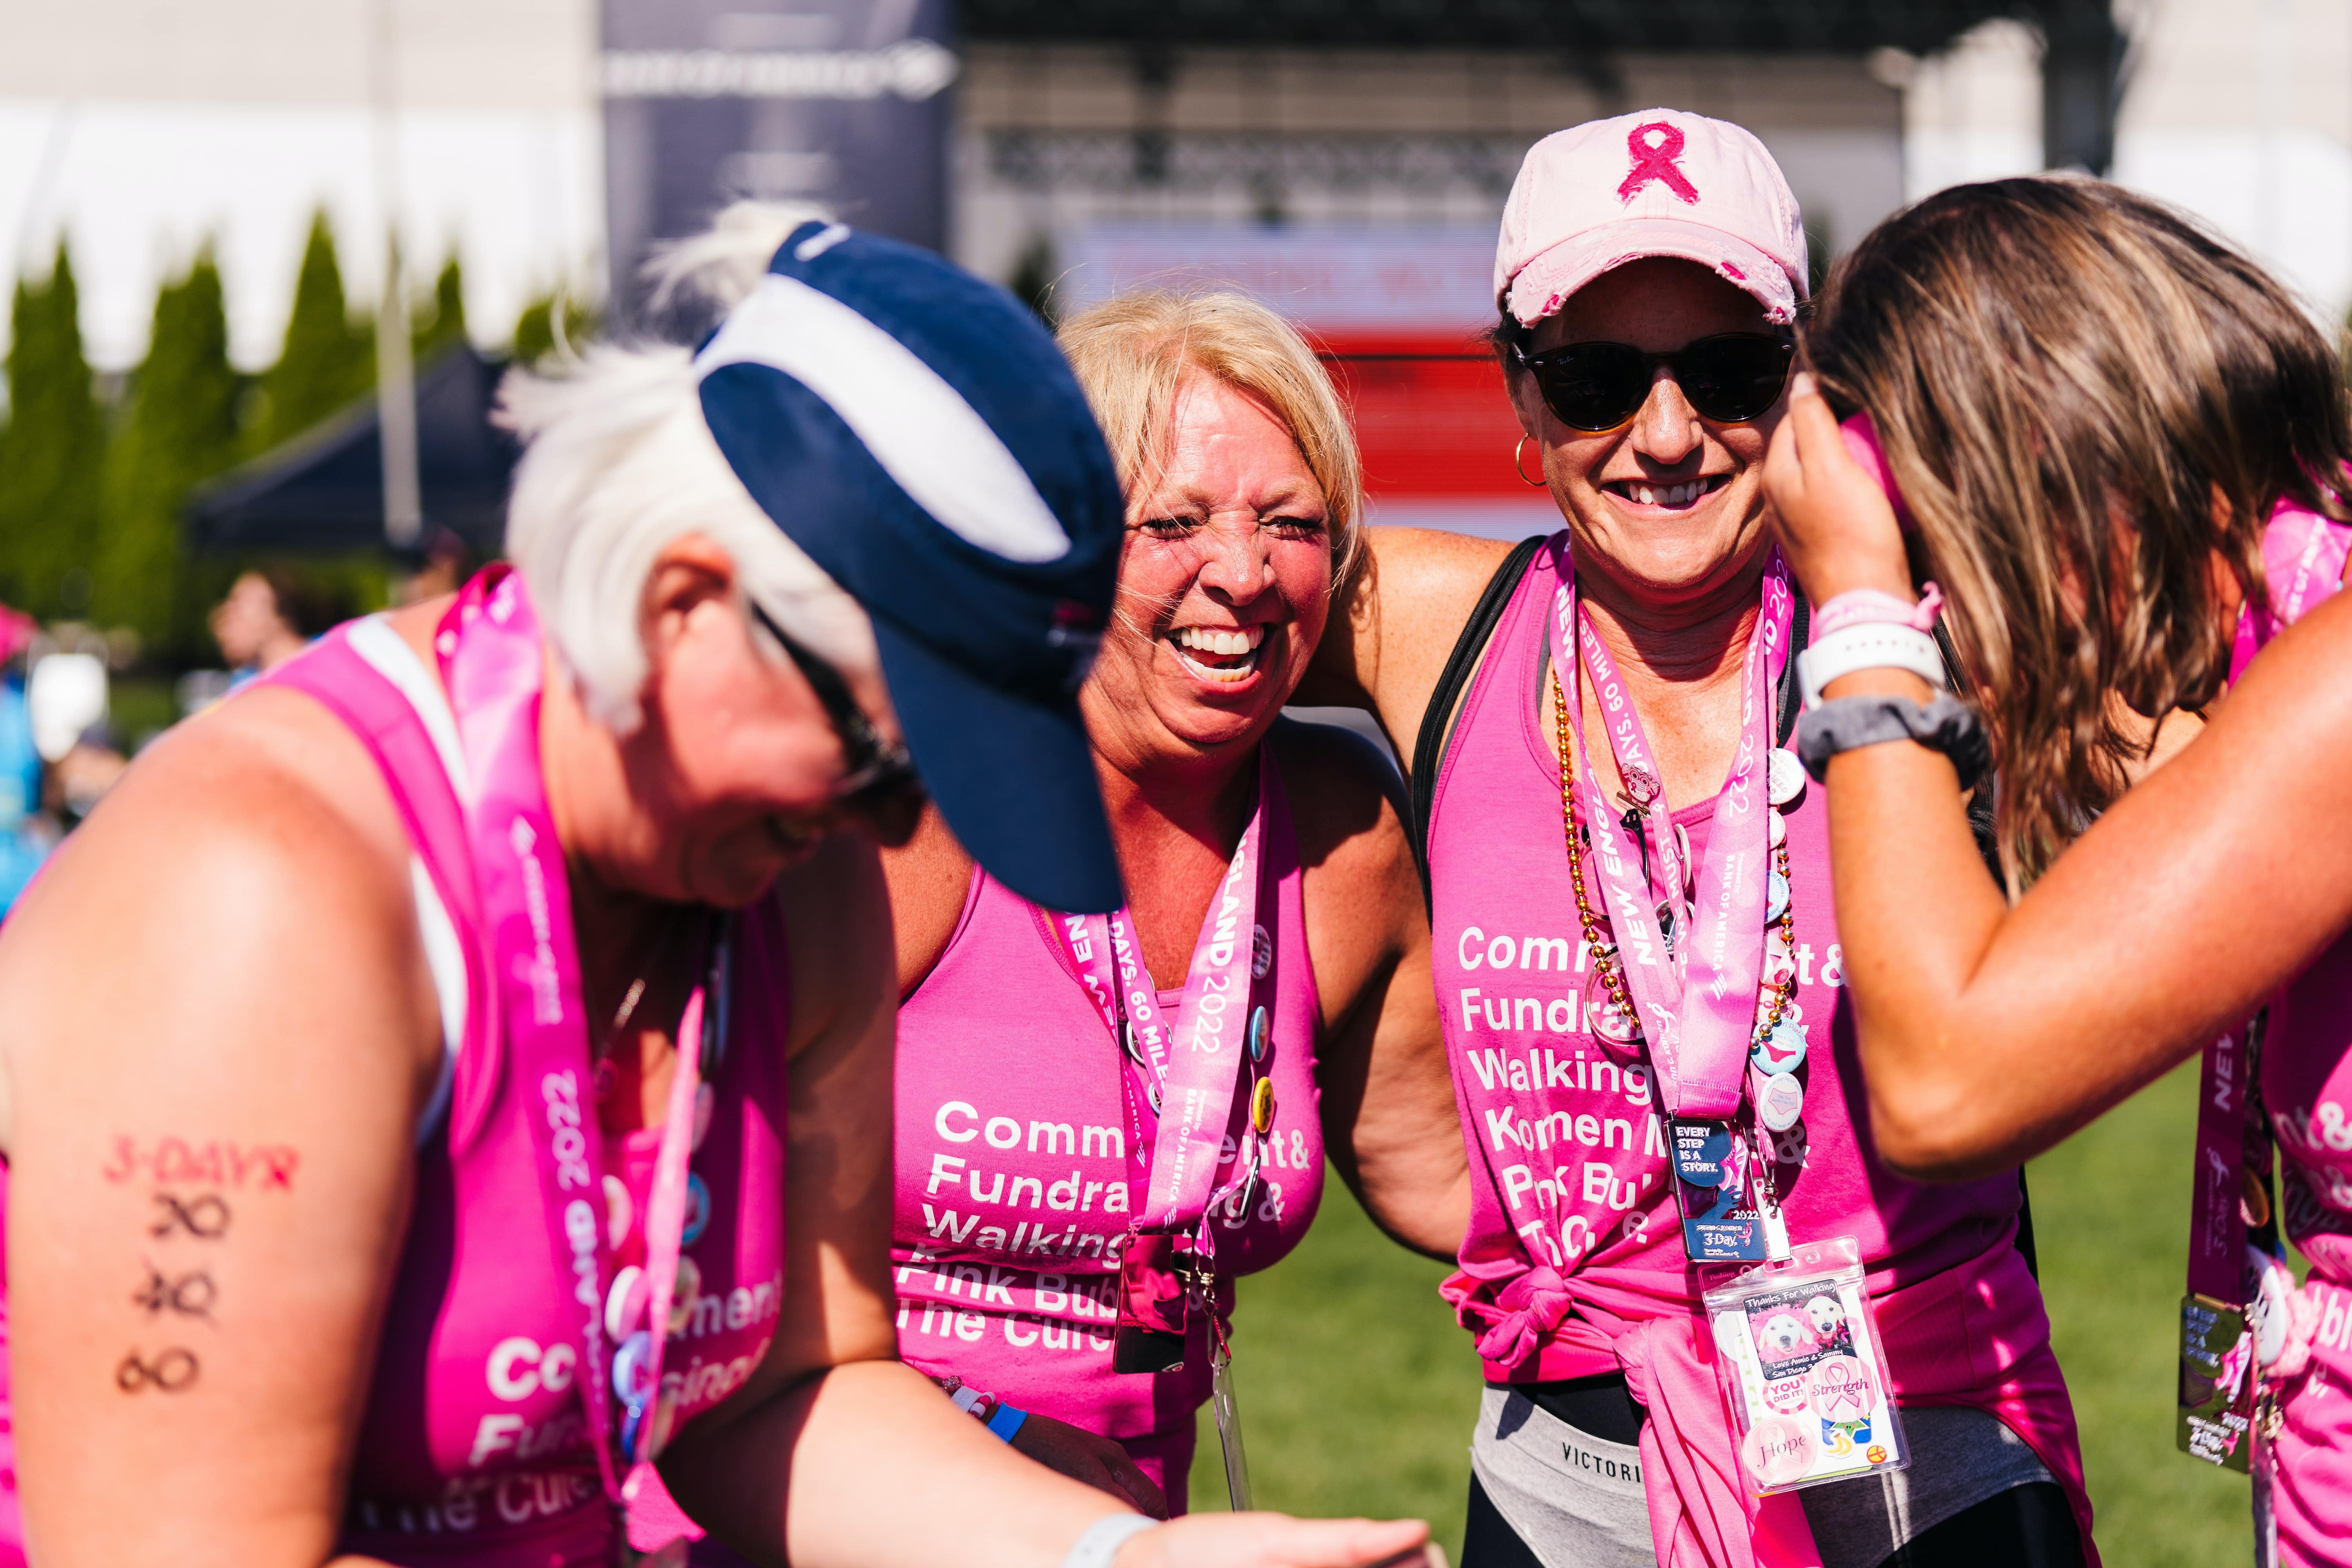 Four women laughing together after completing charity fun run. 